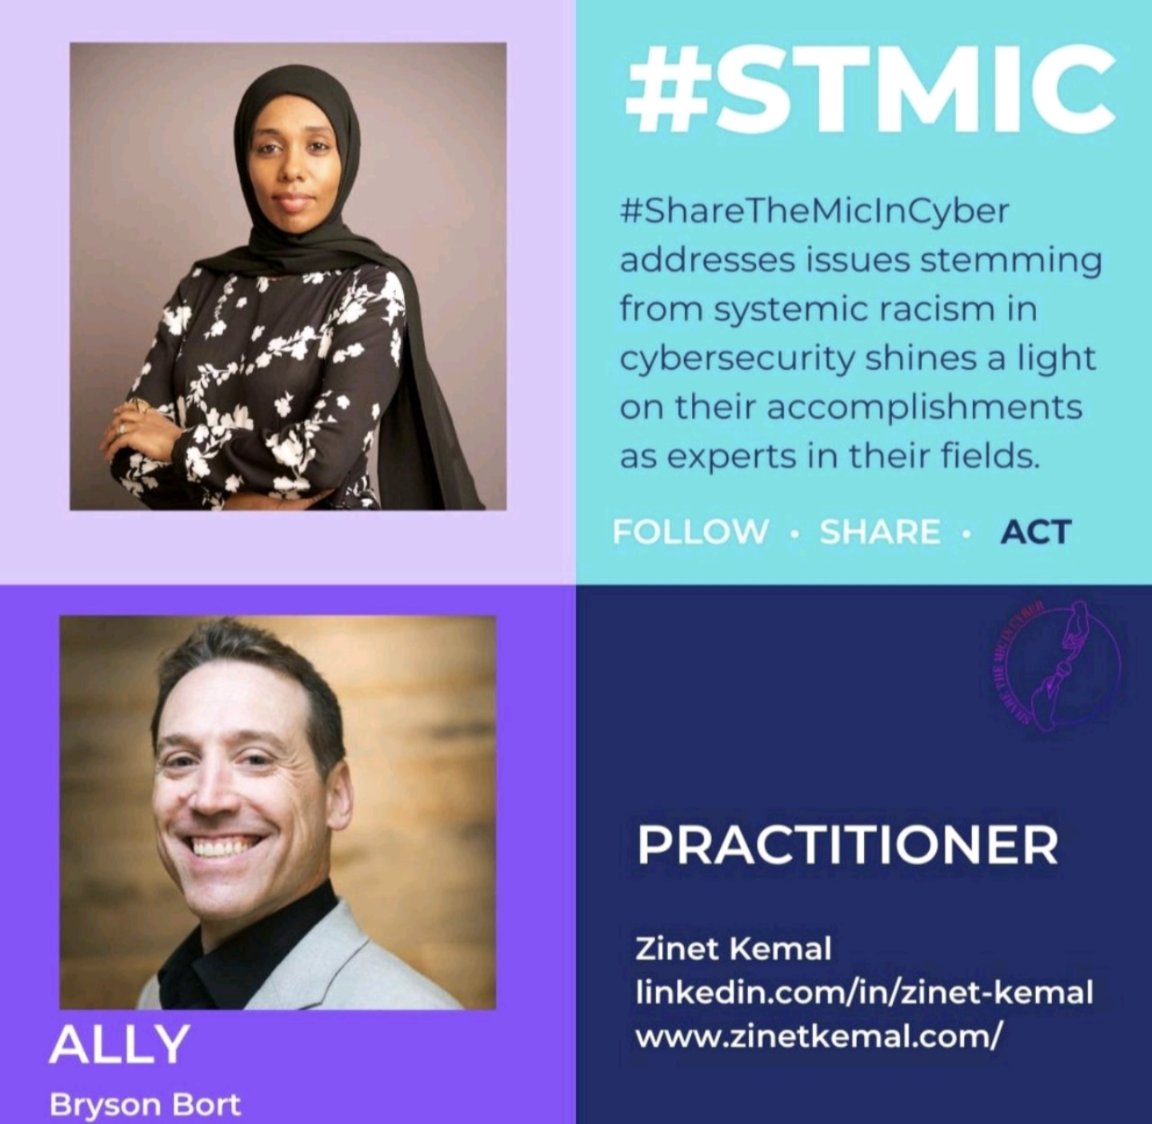 It's ShareTheMicInCyber Day! My #ShareTheMicInCyber partner is Zinet: @zinet_kemal! We're going to tell you all about Zinet's journey to the US, career switch into cyber, being a mom, and her two books! Follow along here.